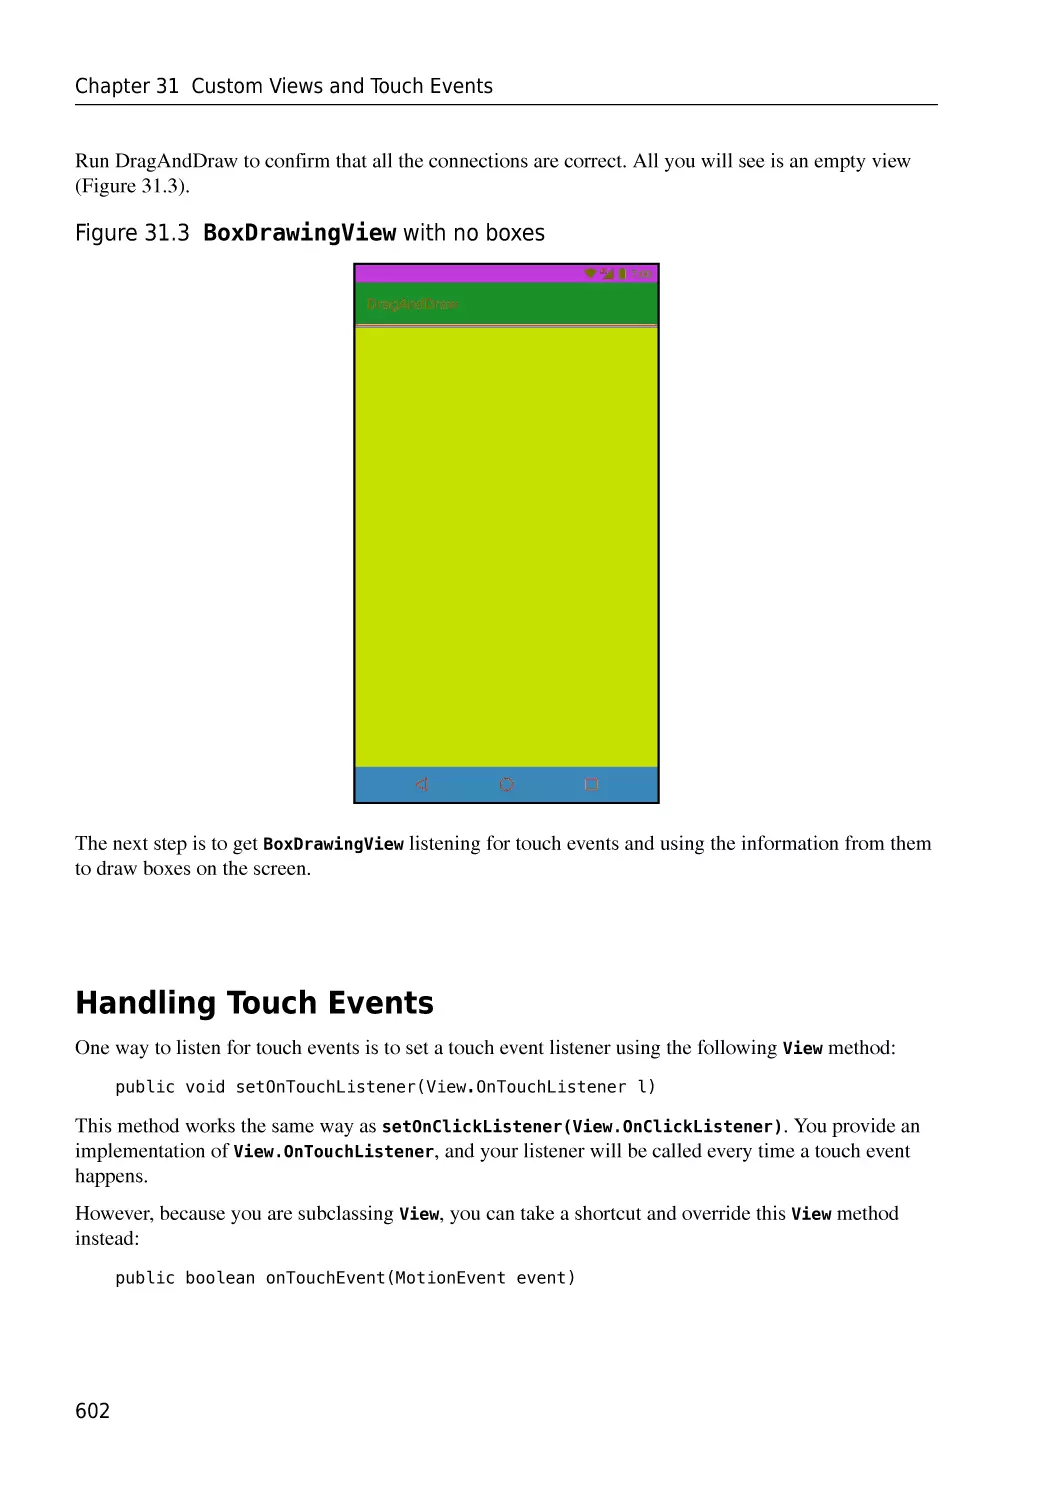 Handling Touch Events